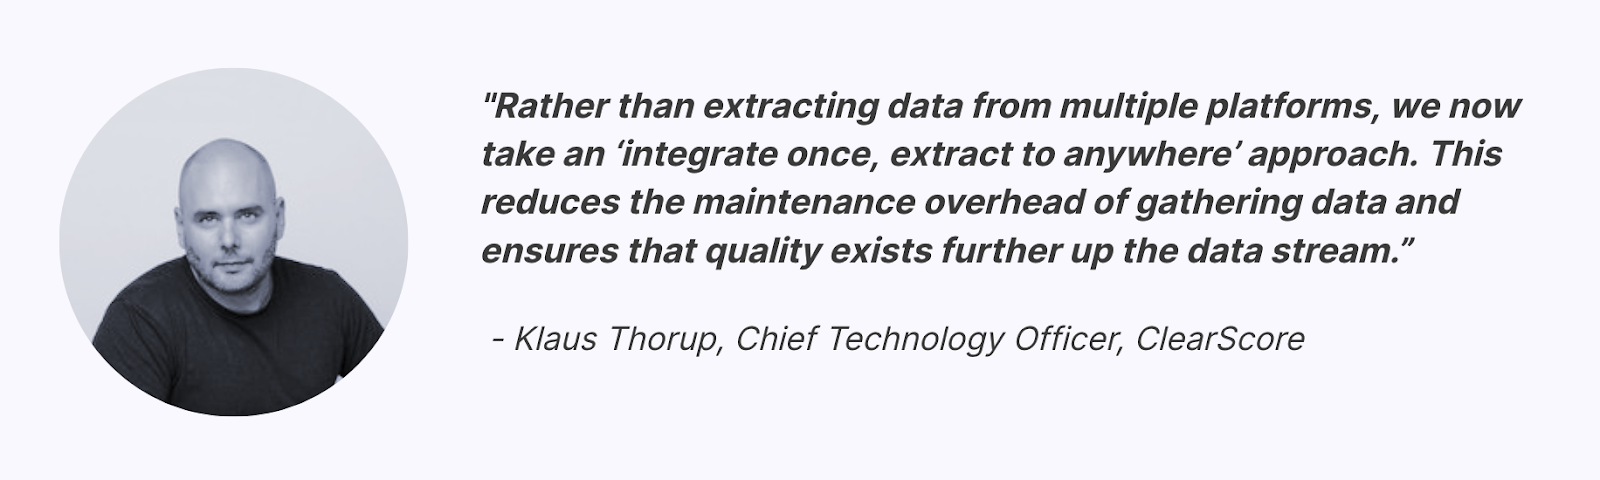 Quote from Klaus Thorup of ClearScore on data architecture